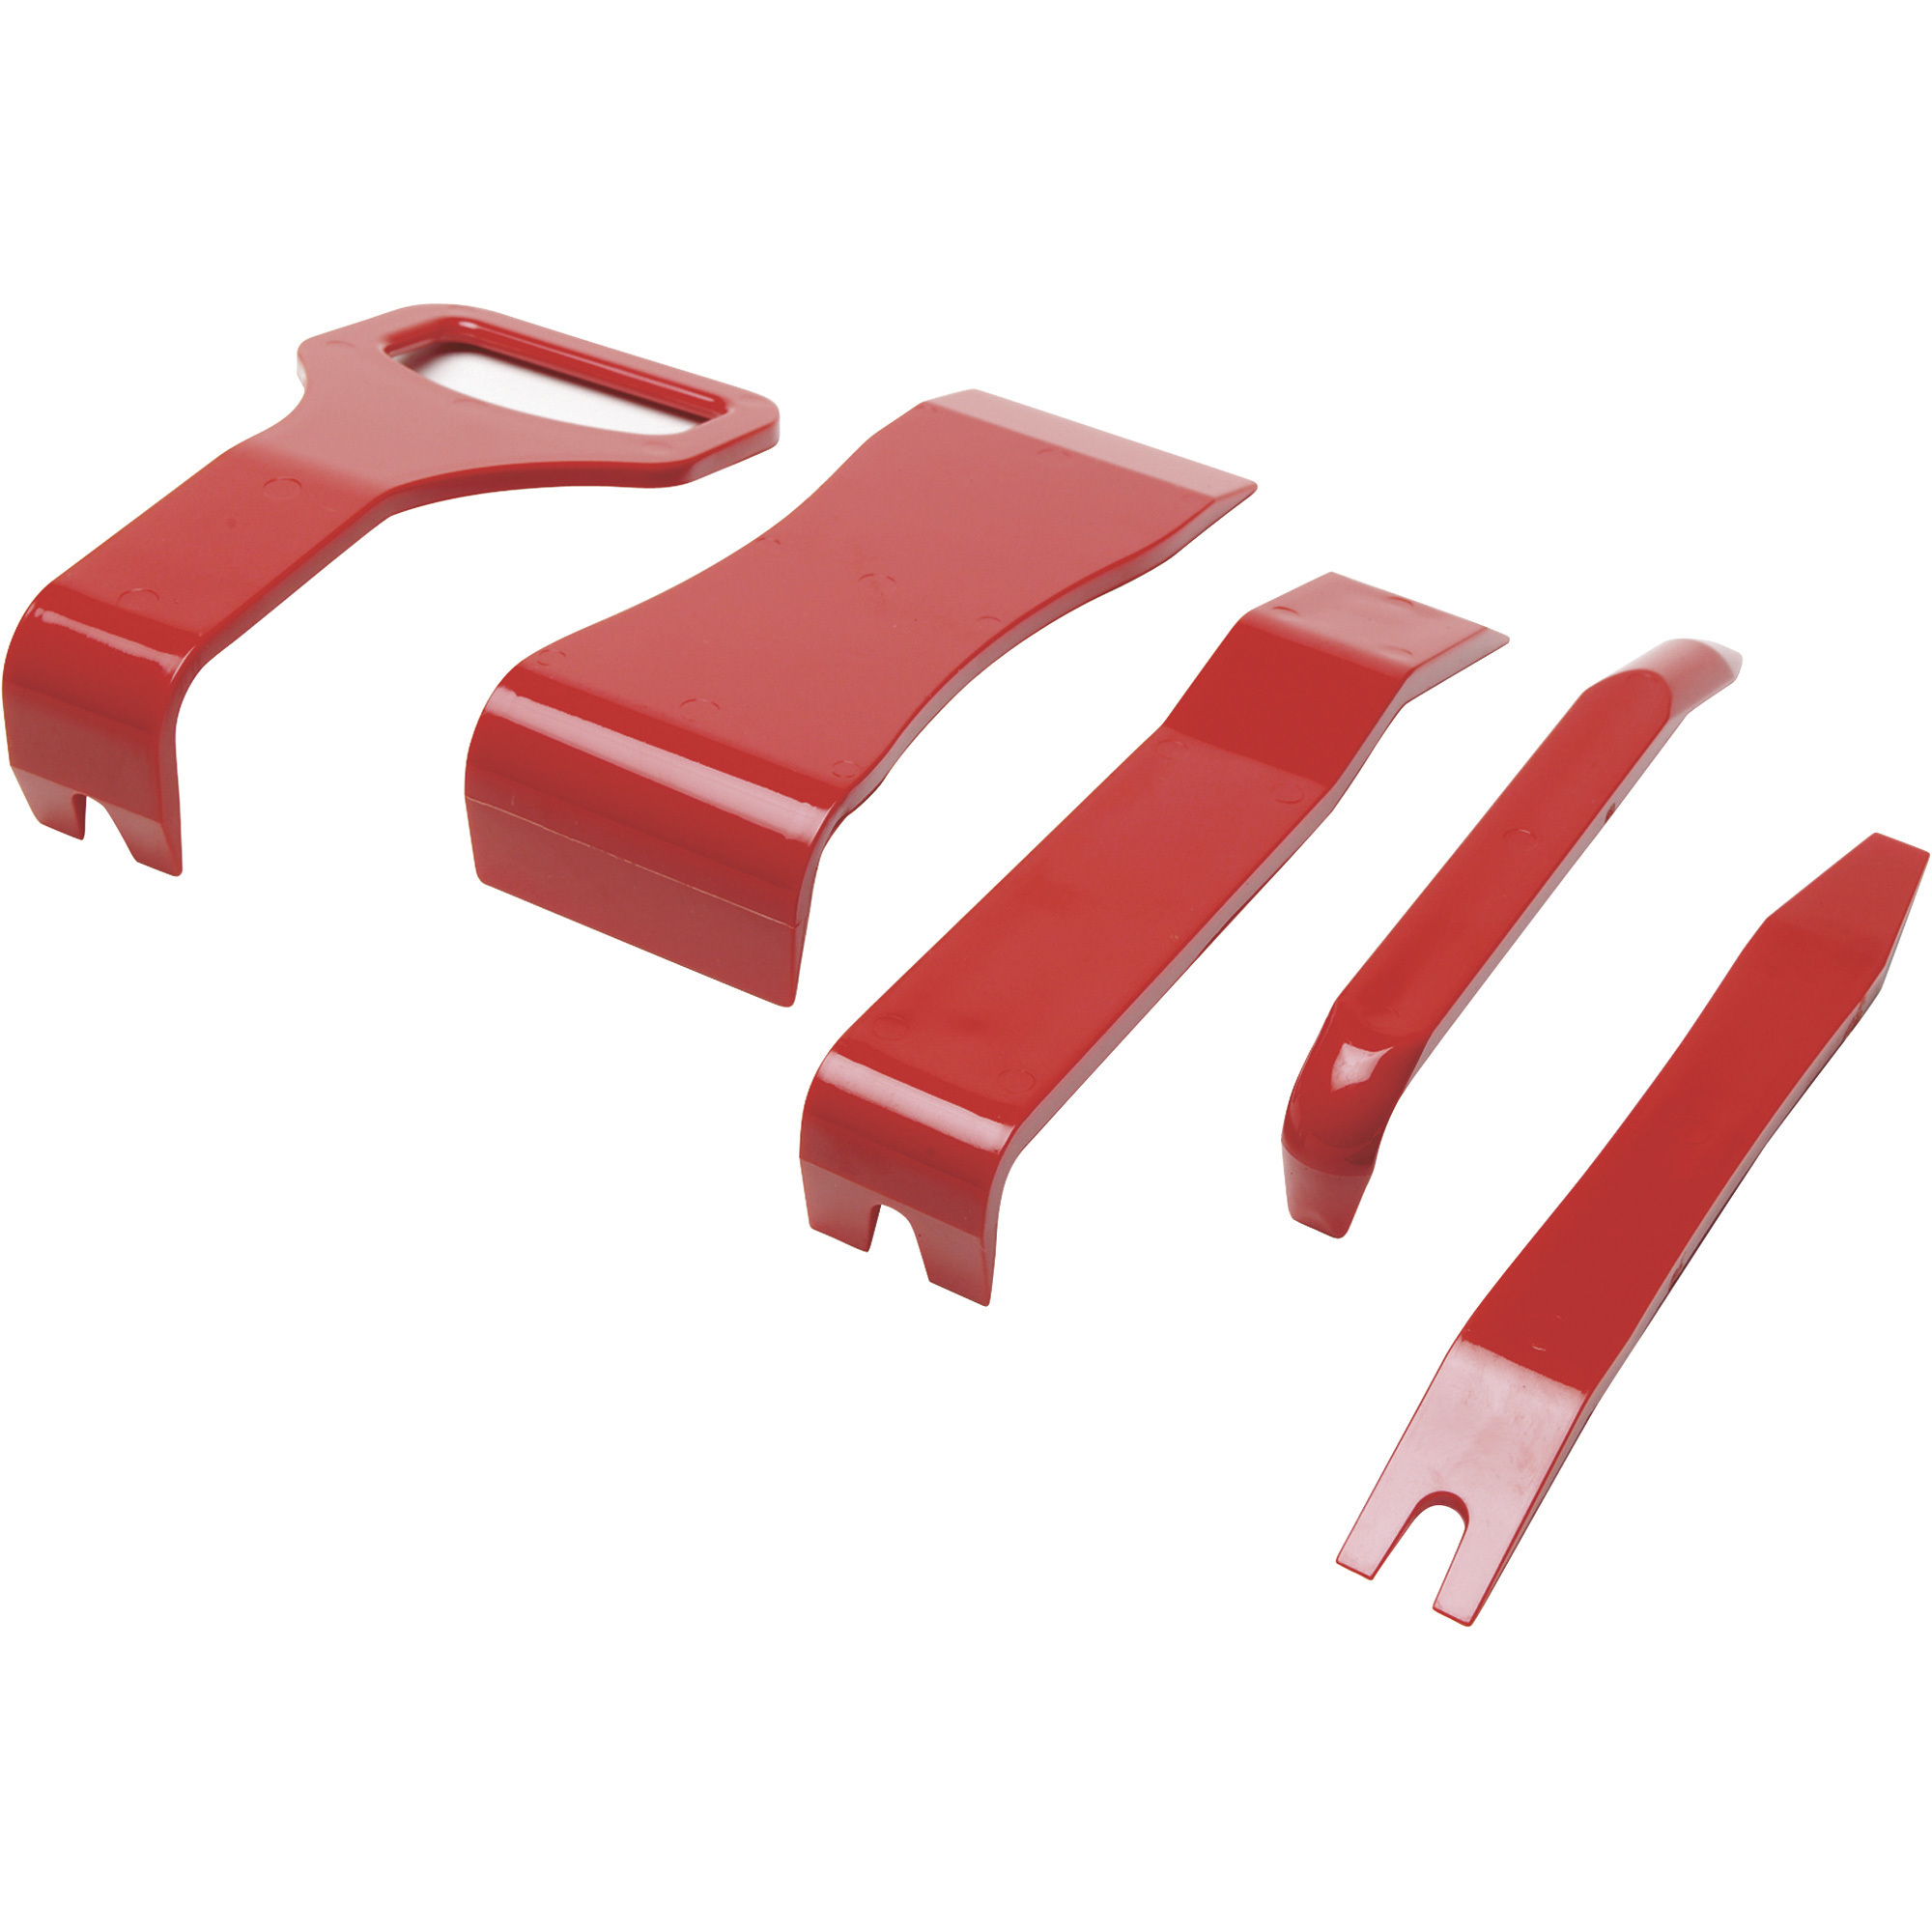 Older Chassis Side Trim Strip and Door Panel Removal Tool, Specialty Tools  Product